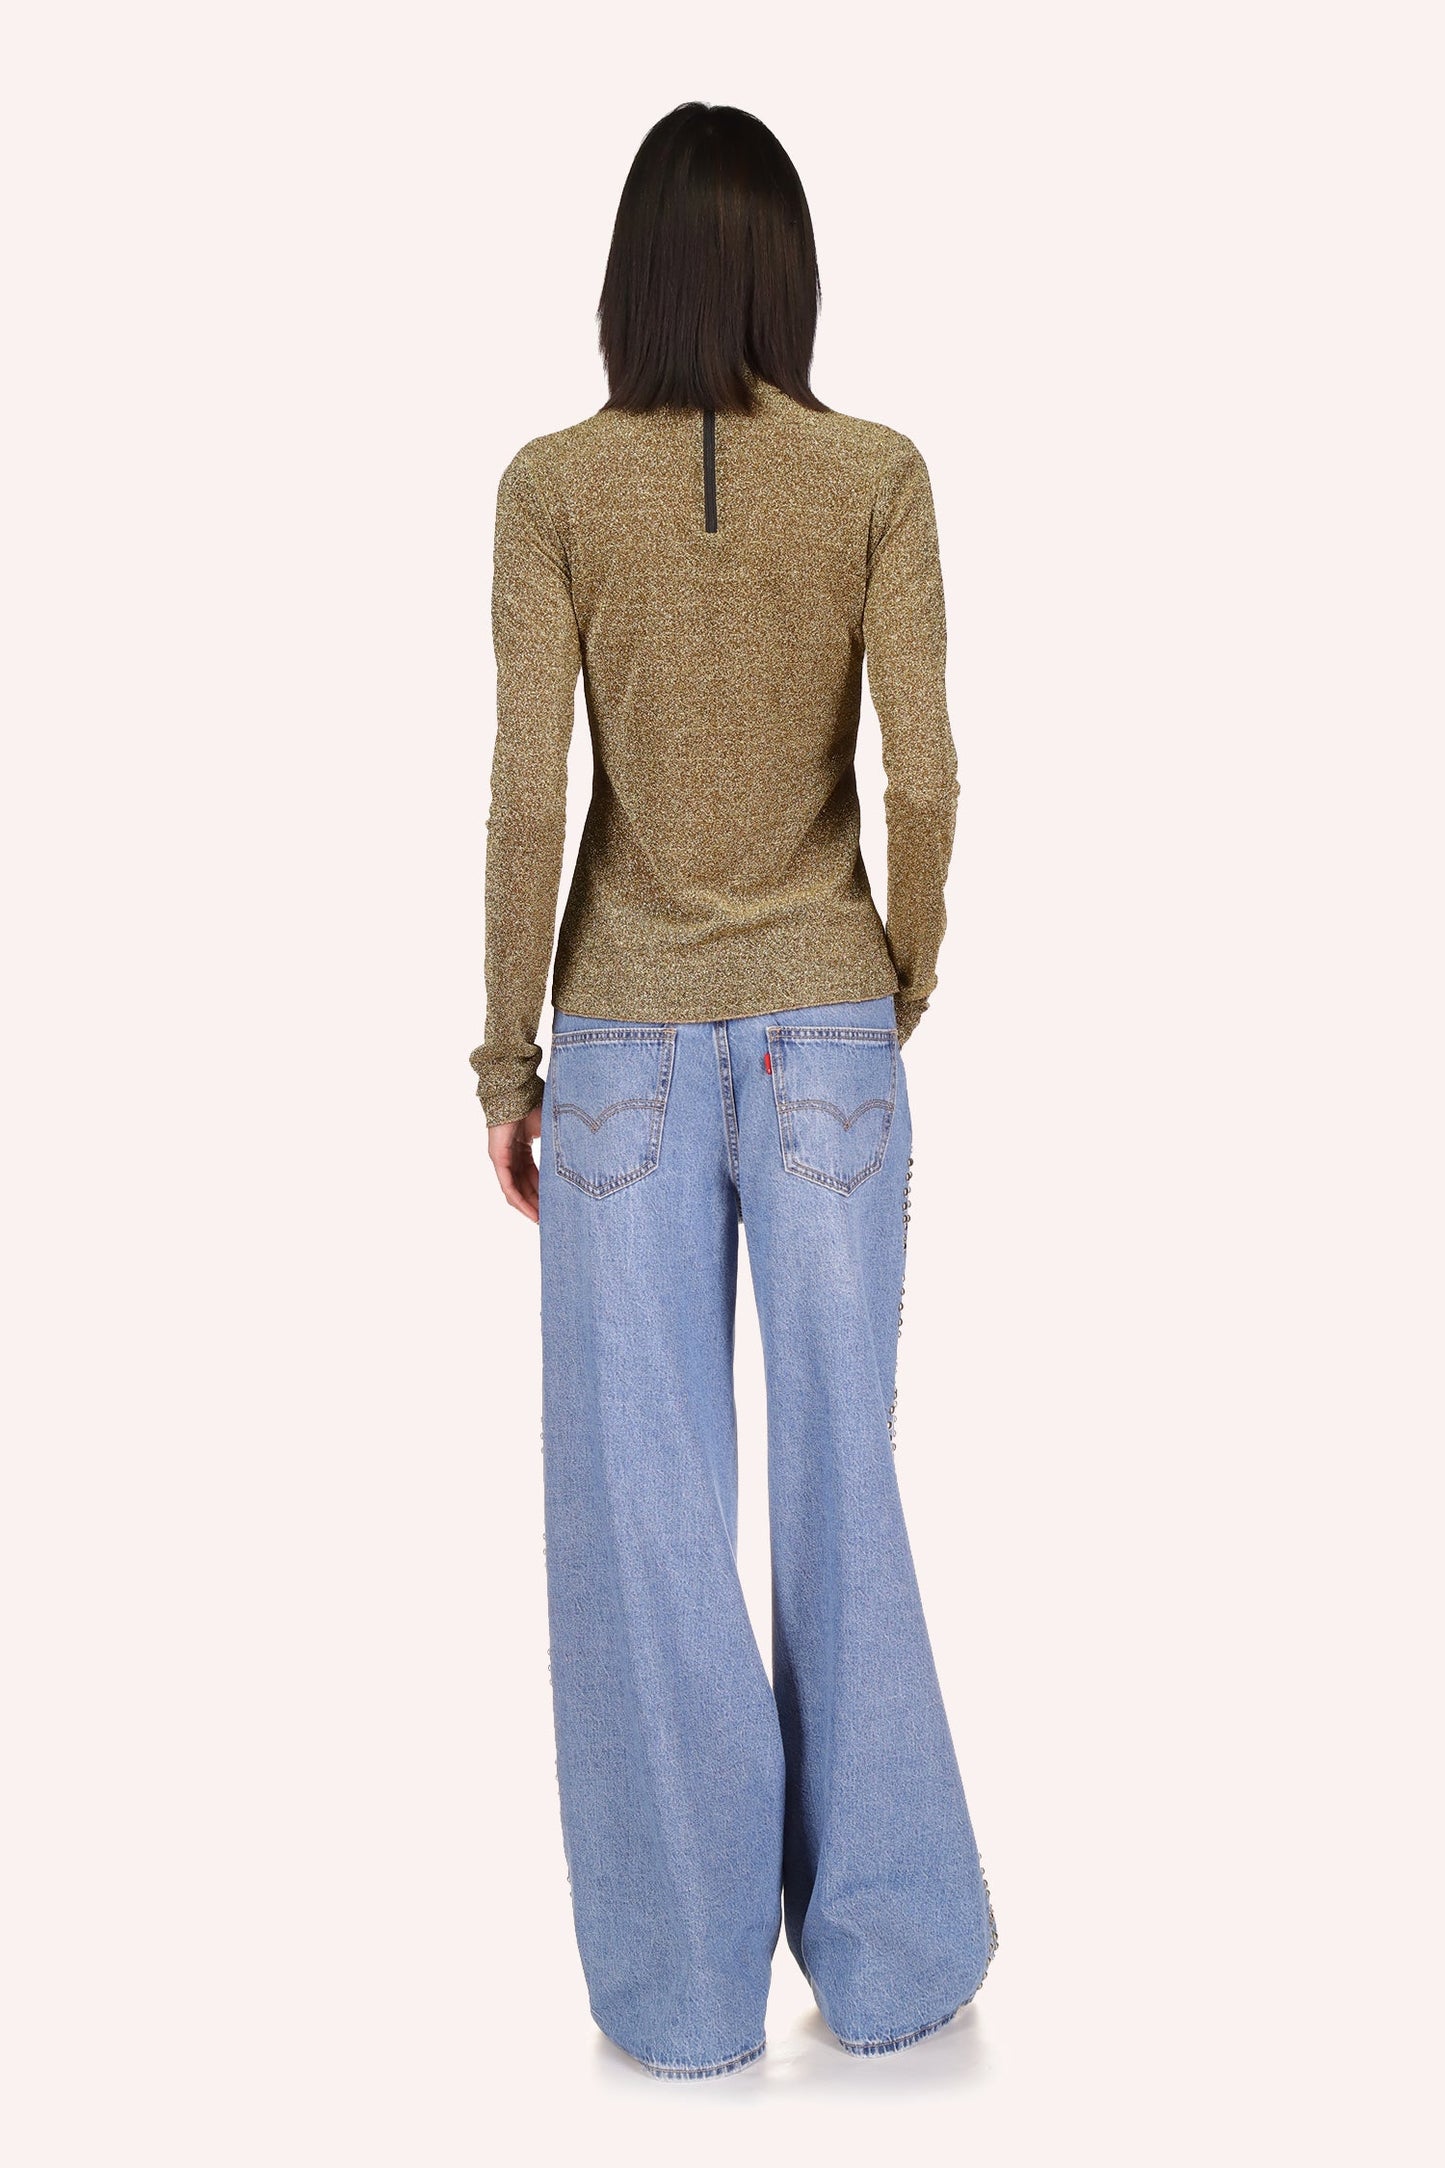 Anna Sui Shiny gold turtlenecks with long sleeves that can cover hands and back zipper